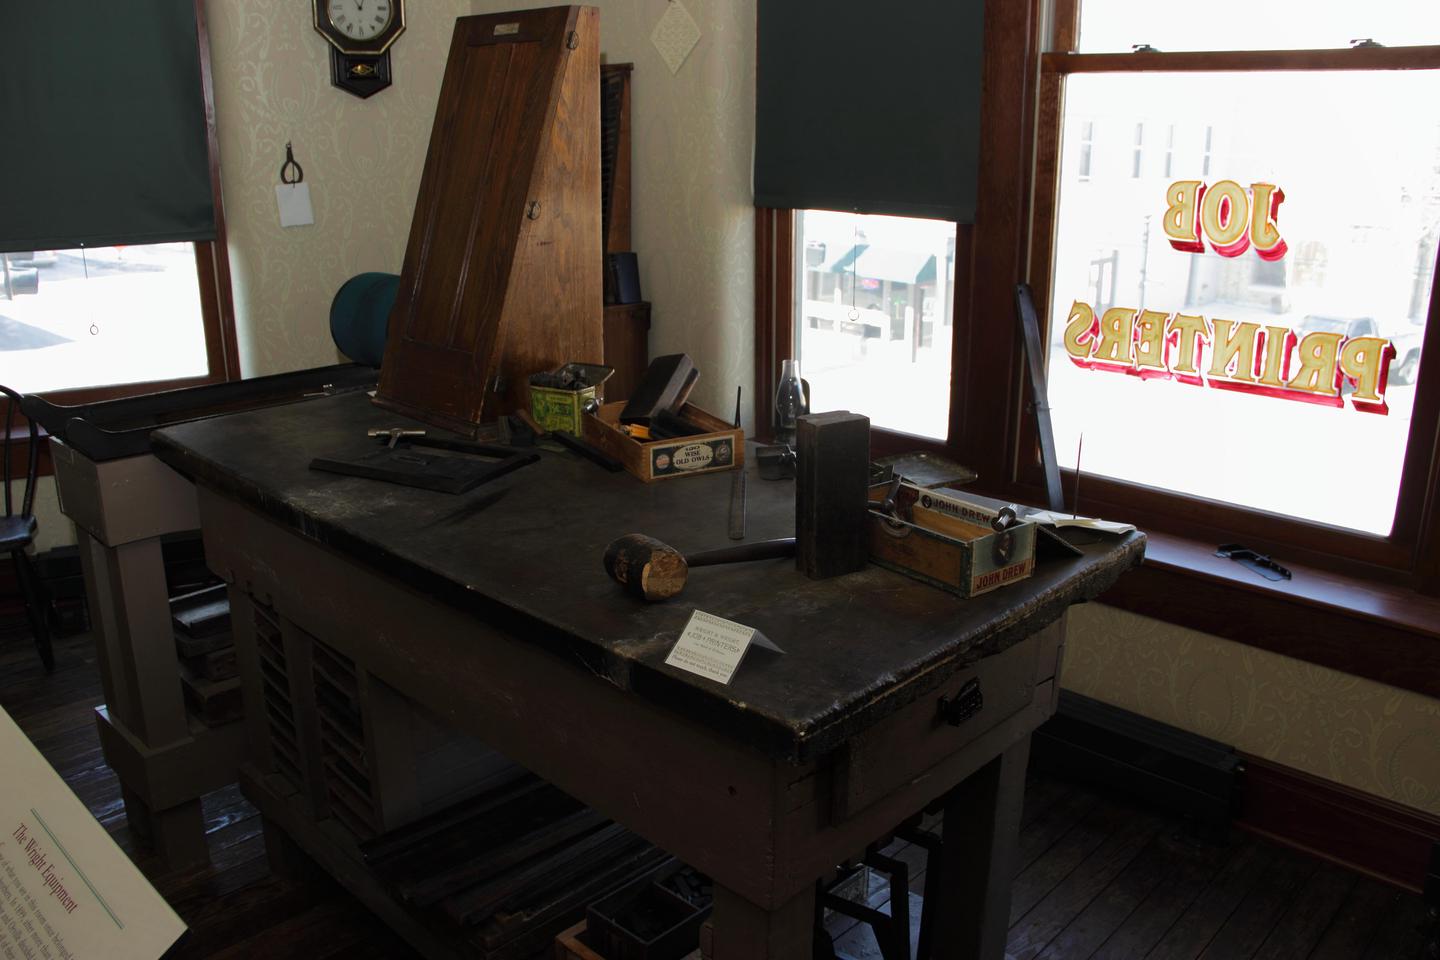 Job PrintersThe second floor of the Wright-Dunbar Interpretive Center features a print shop similar to the one that the Wright brothers used in their day.